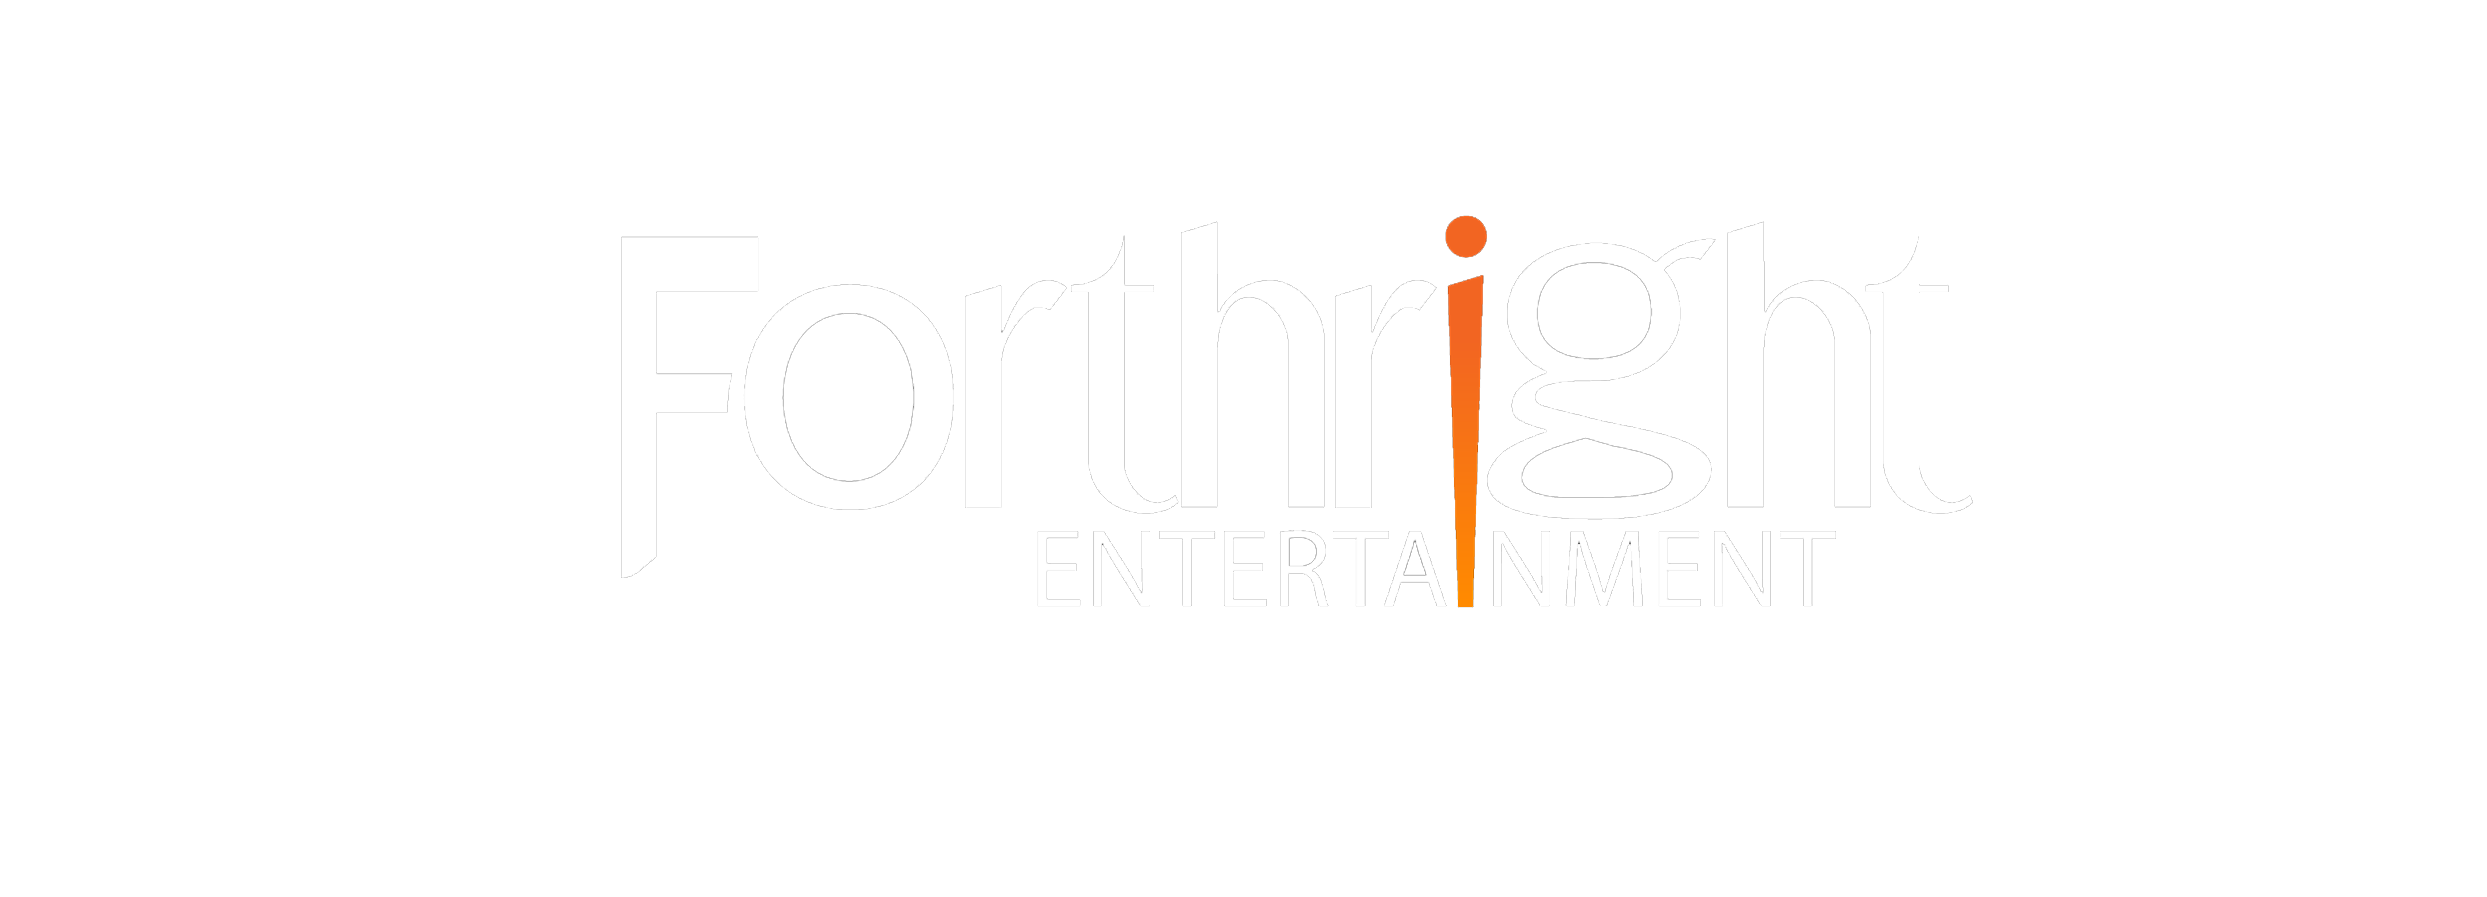 Forthright Entertainment